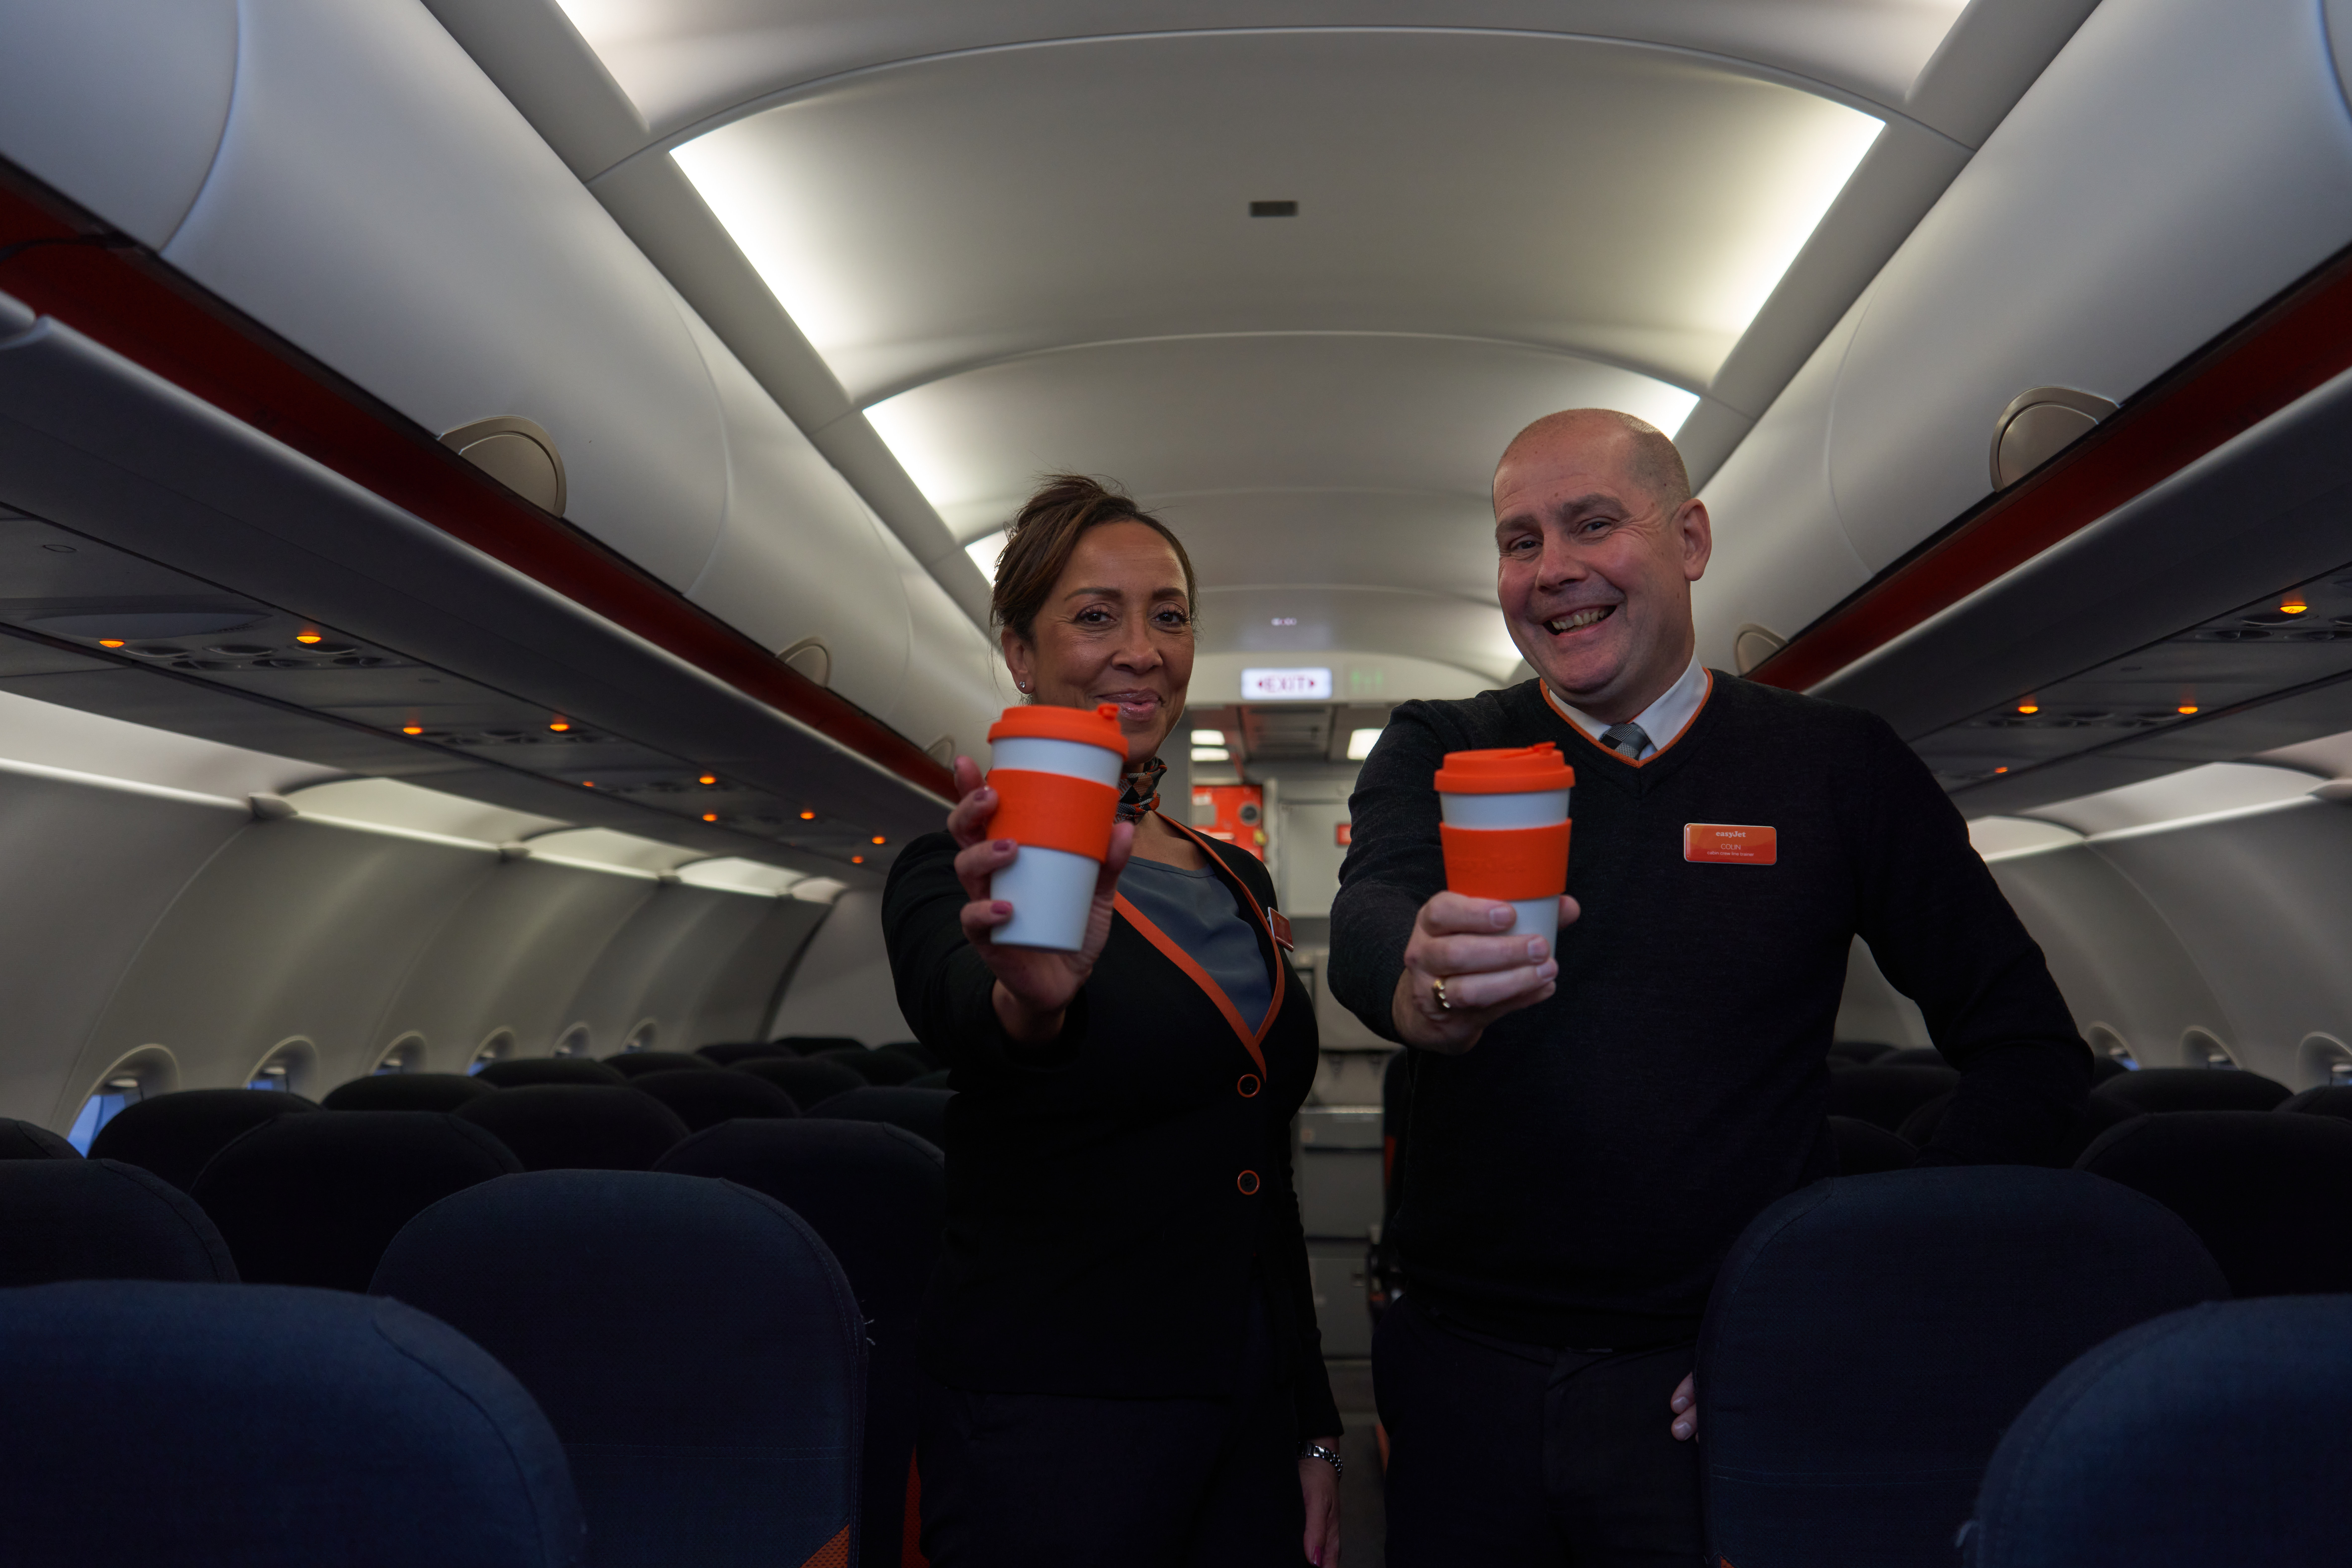 easyJet crew pose with reusable cups